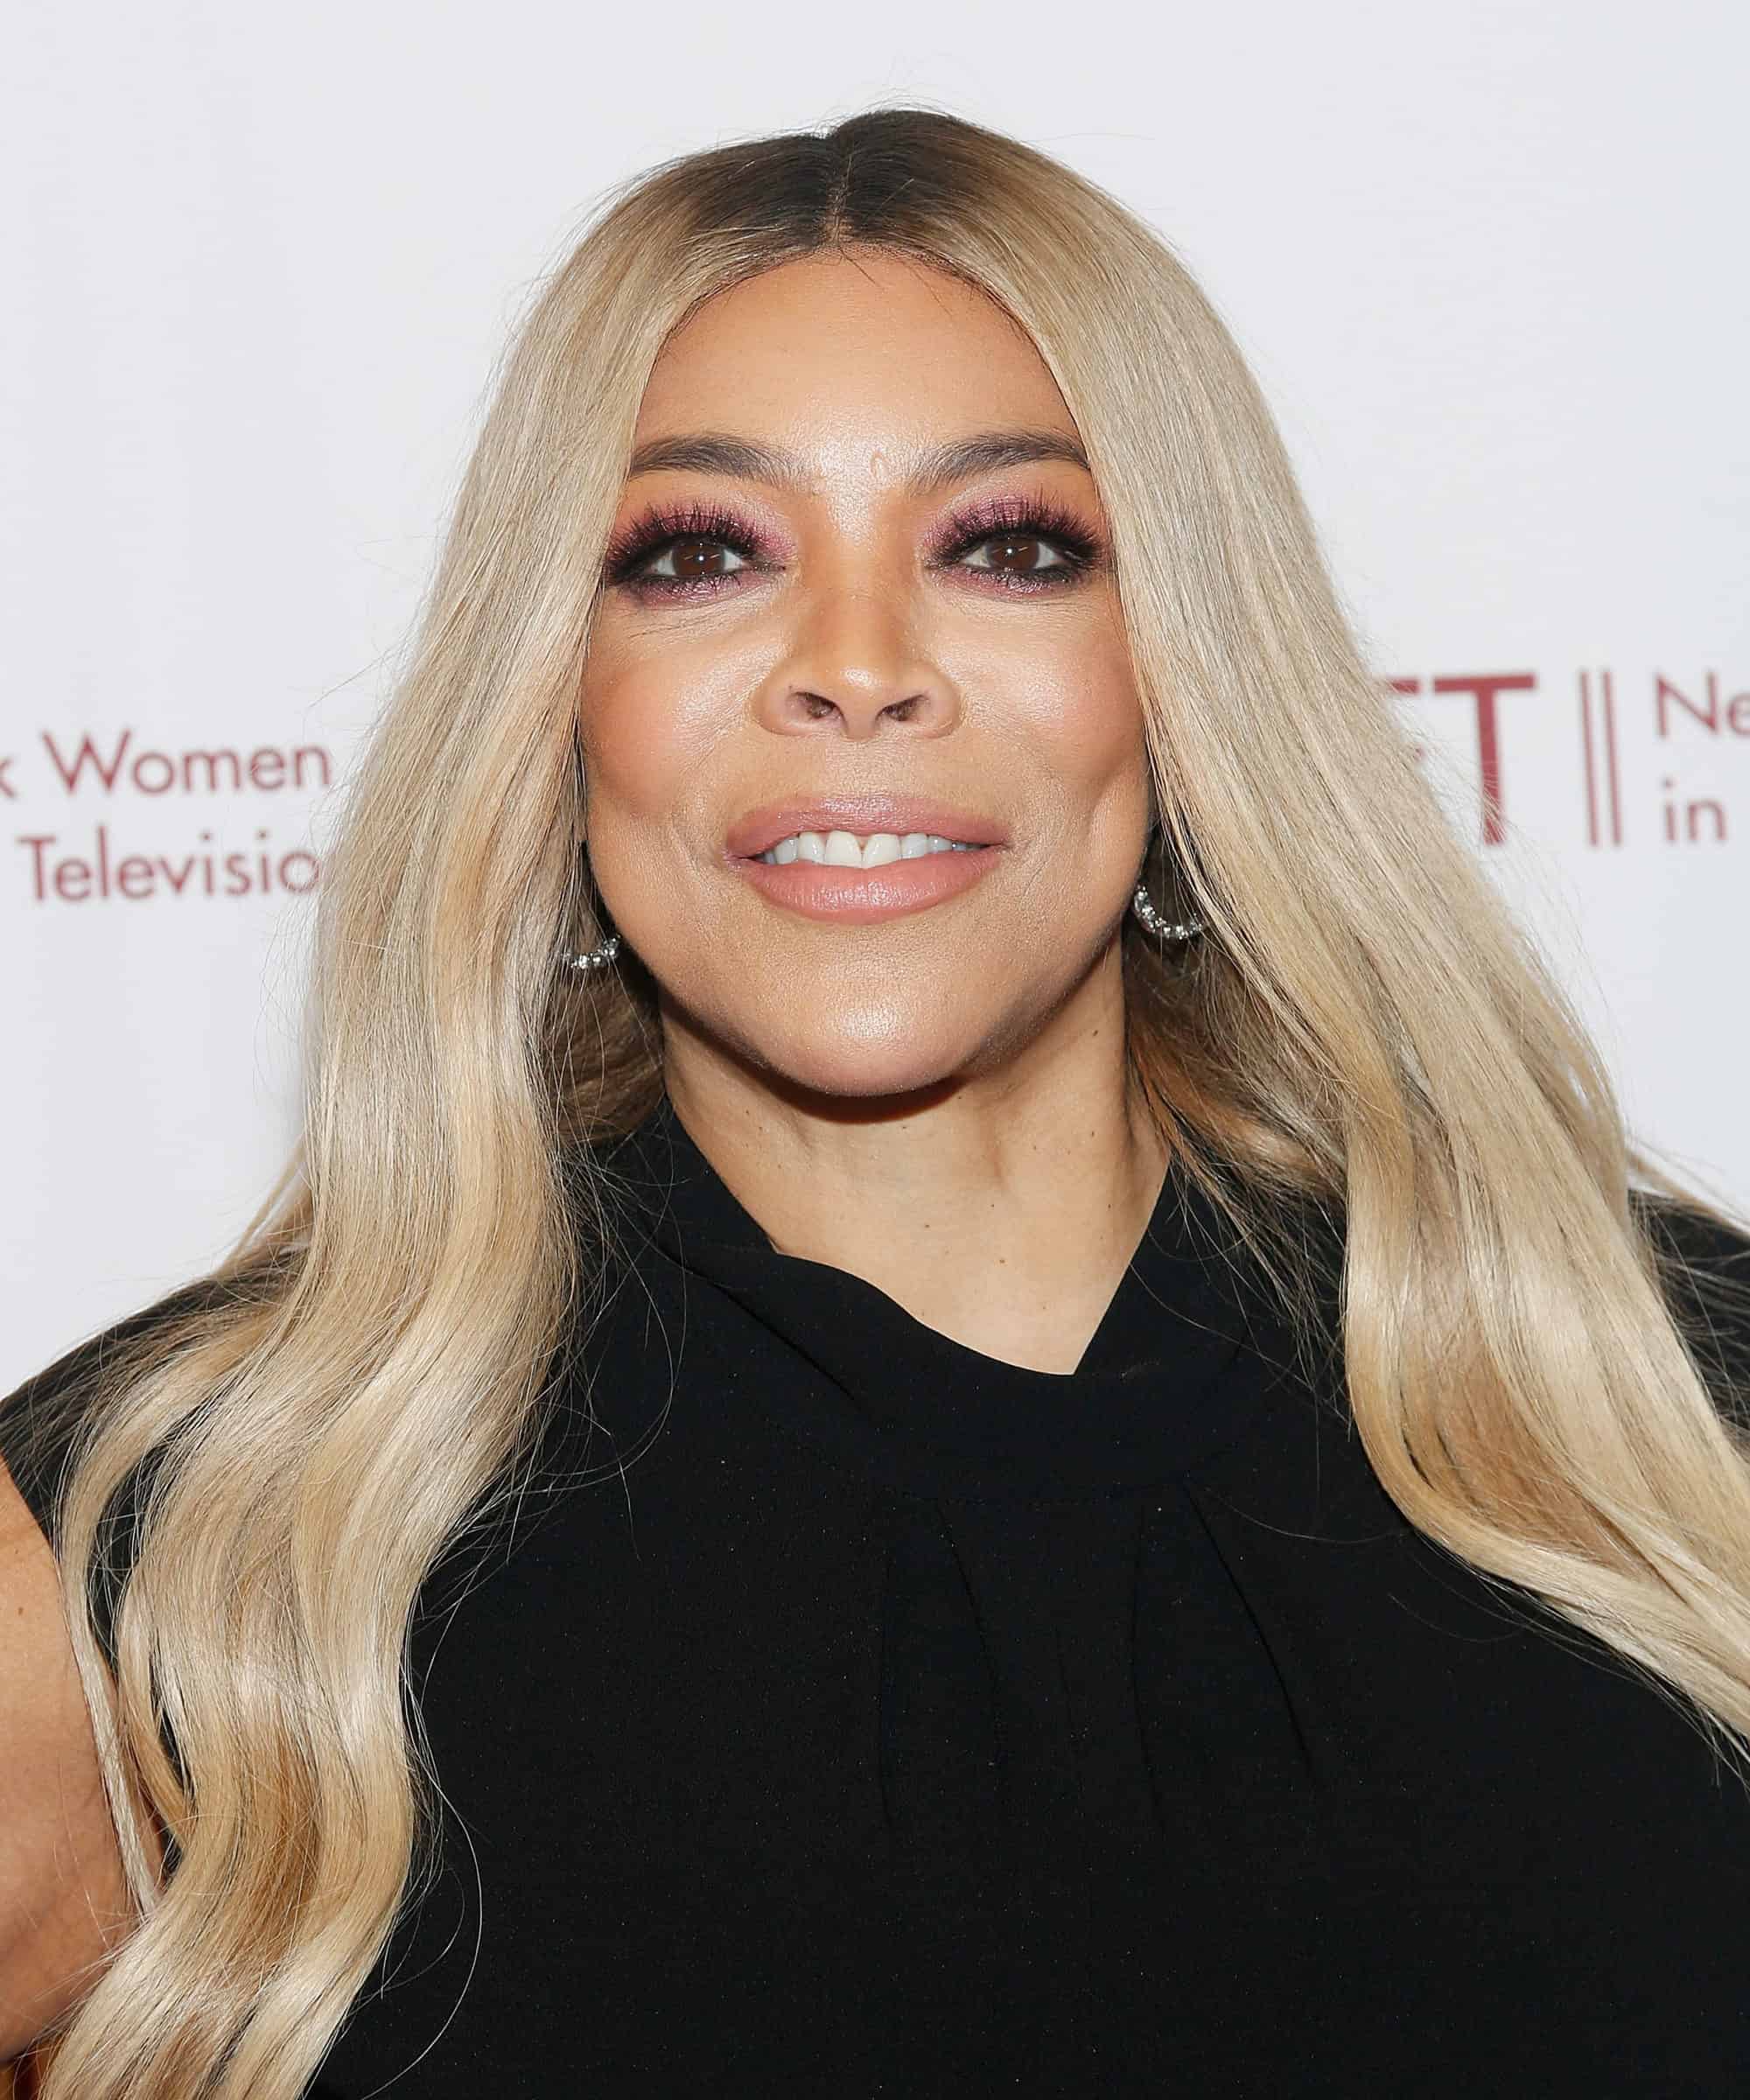 Wendy Williams Shares A Pic Cuddling With A New Mystery Man She Referred To As A ‘Real Gentleman’ (Pic Inside)